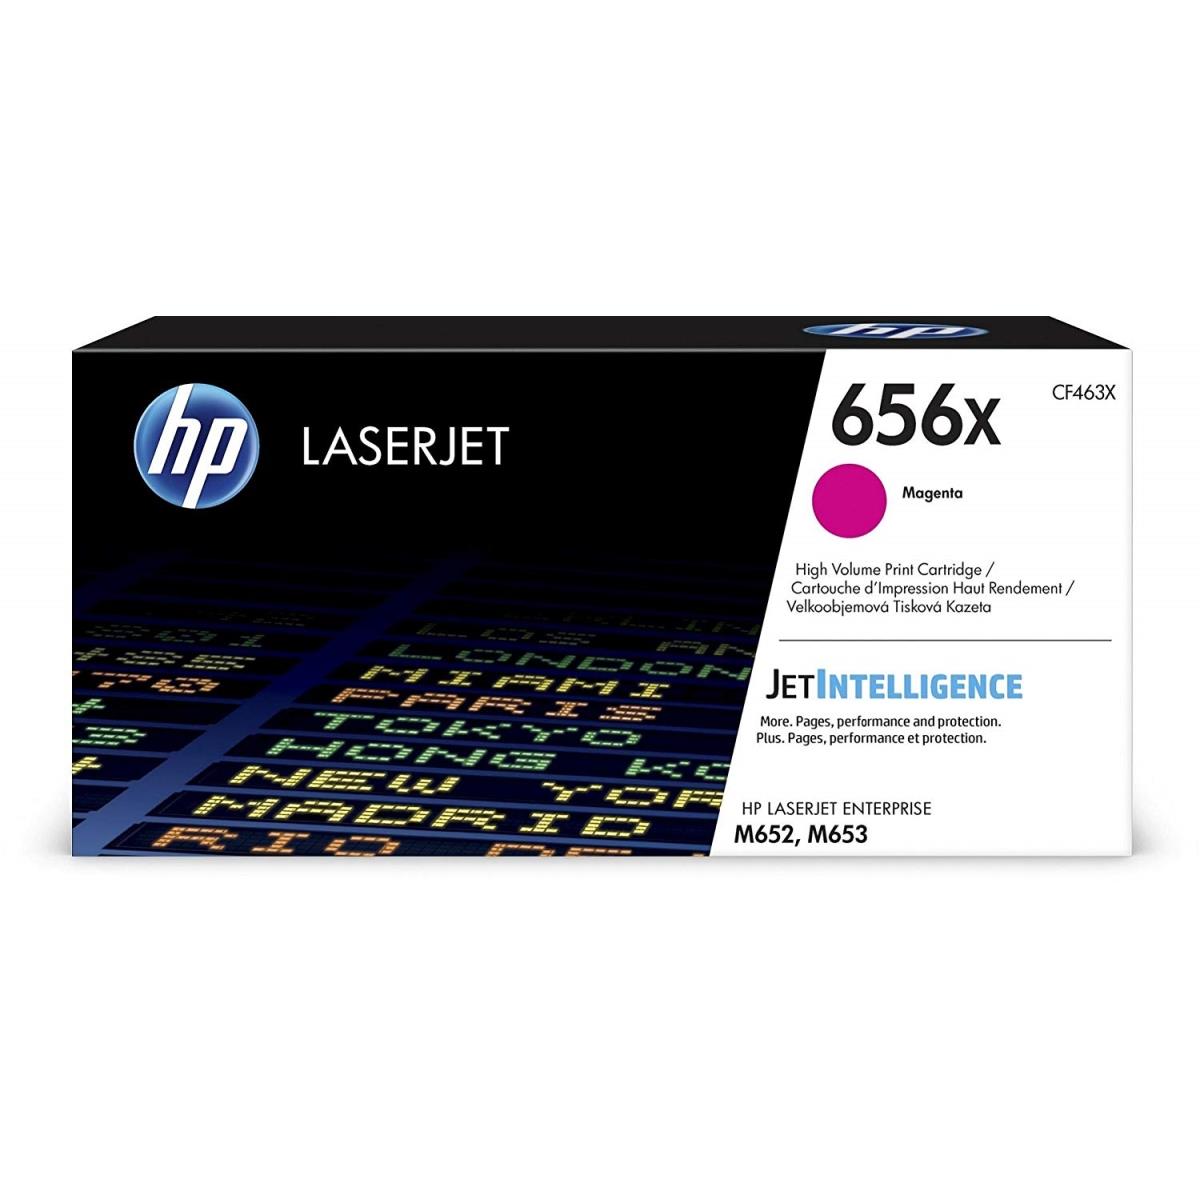 Picture of Aster Graphics AC-HF463XM CF463X HP Compatible Toner Cartridge - Magenta